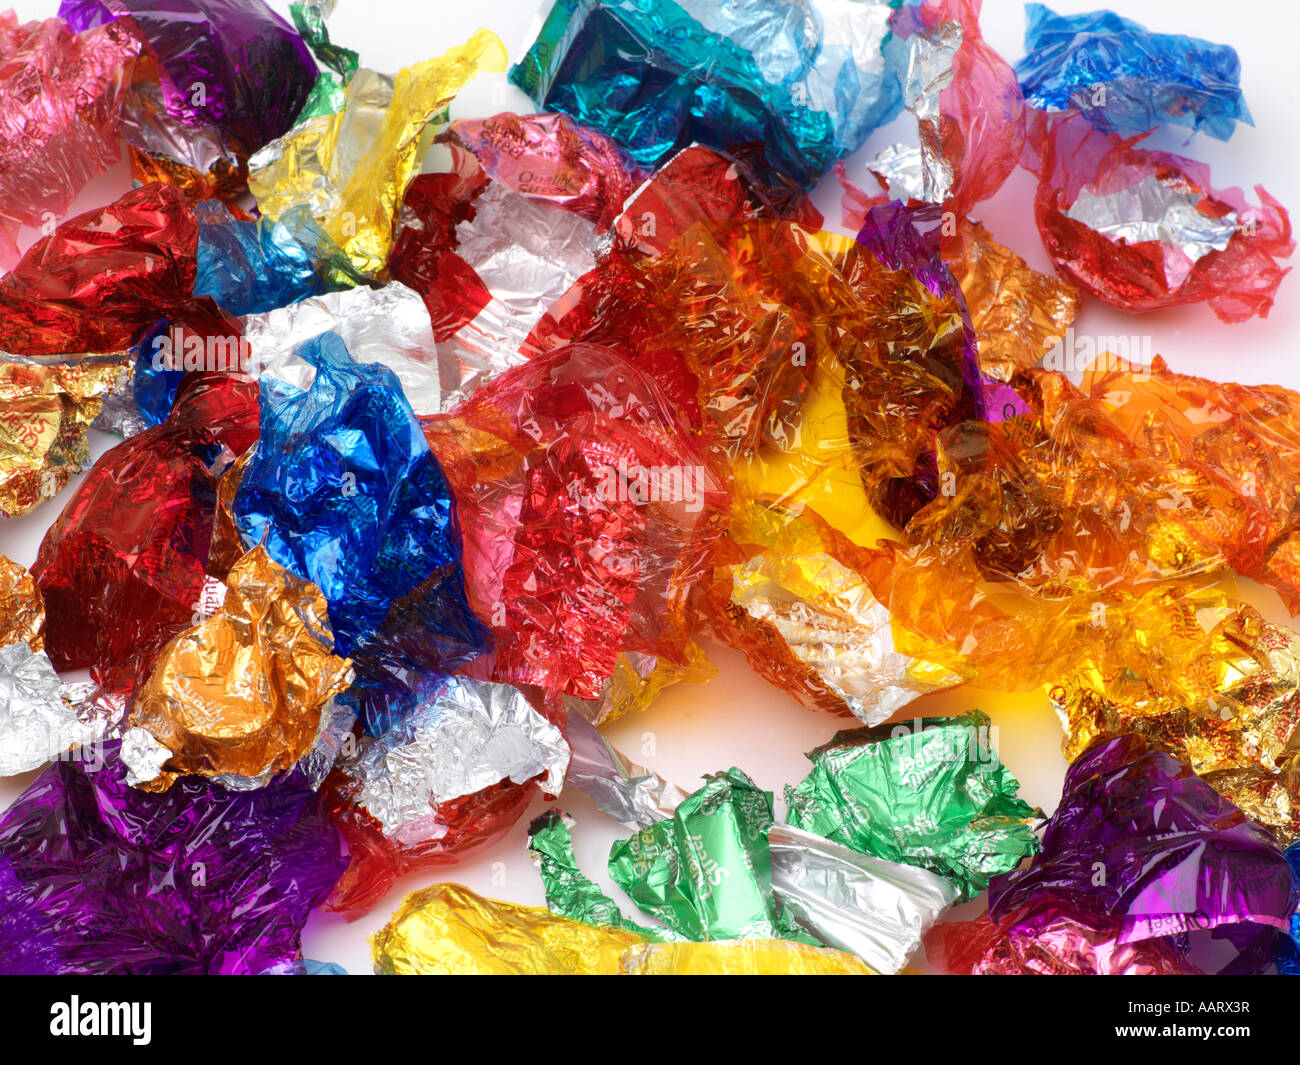 Pile of Sweet Wrappers Stock Photo